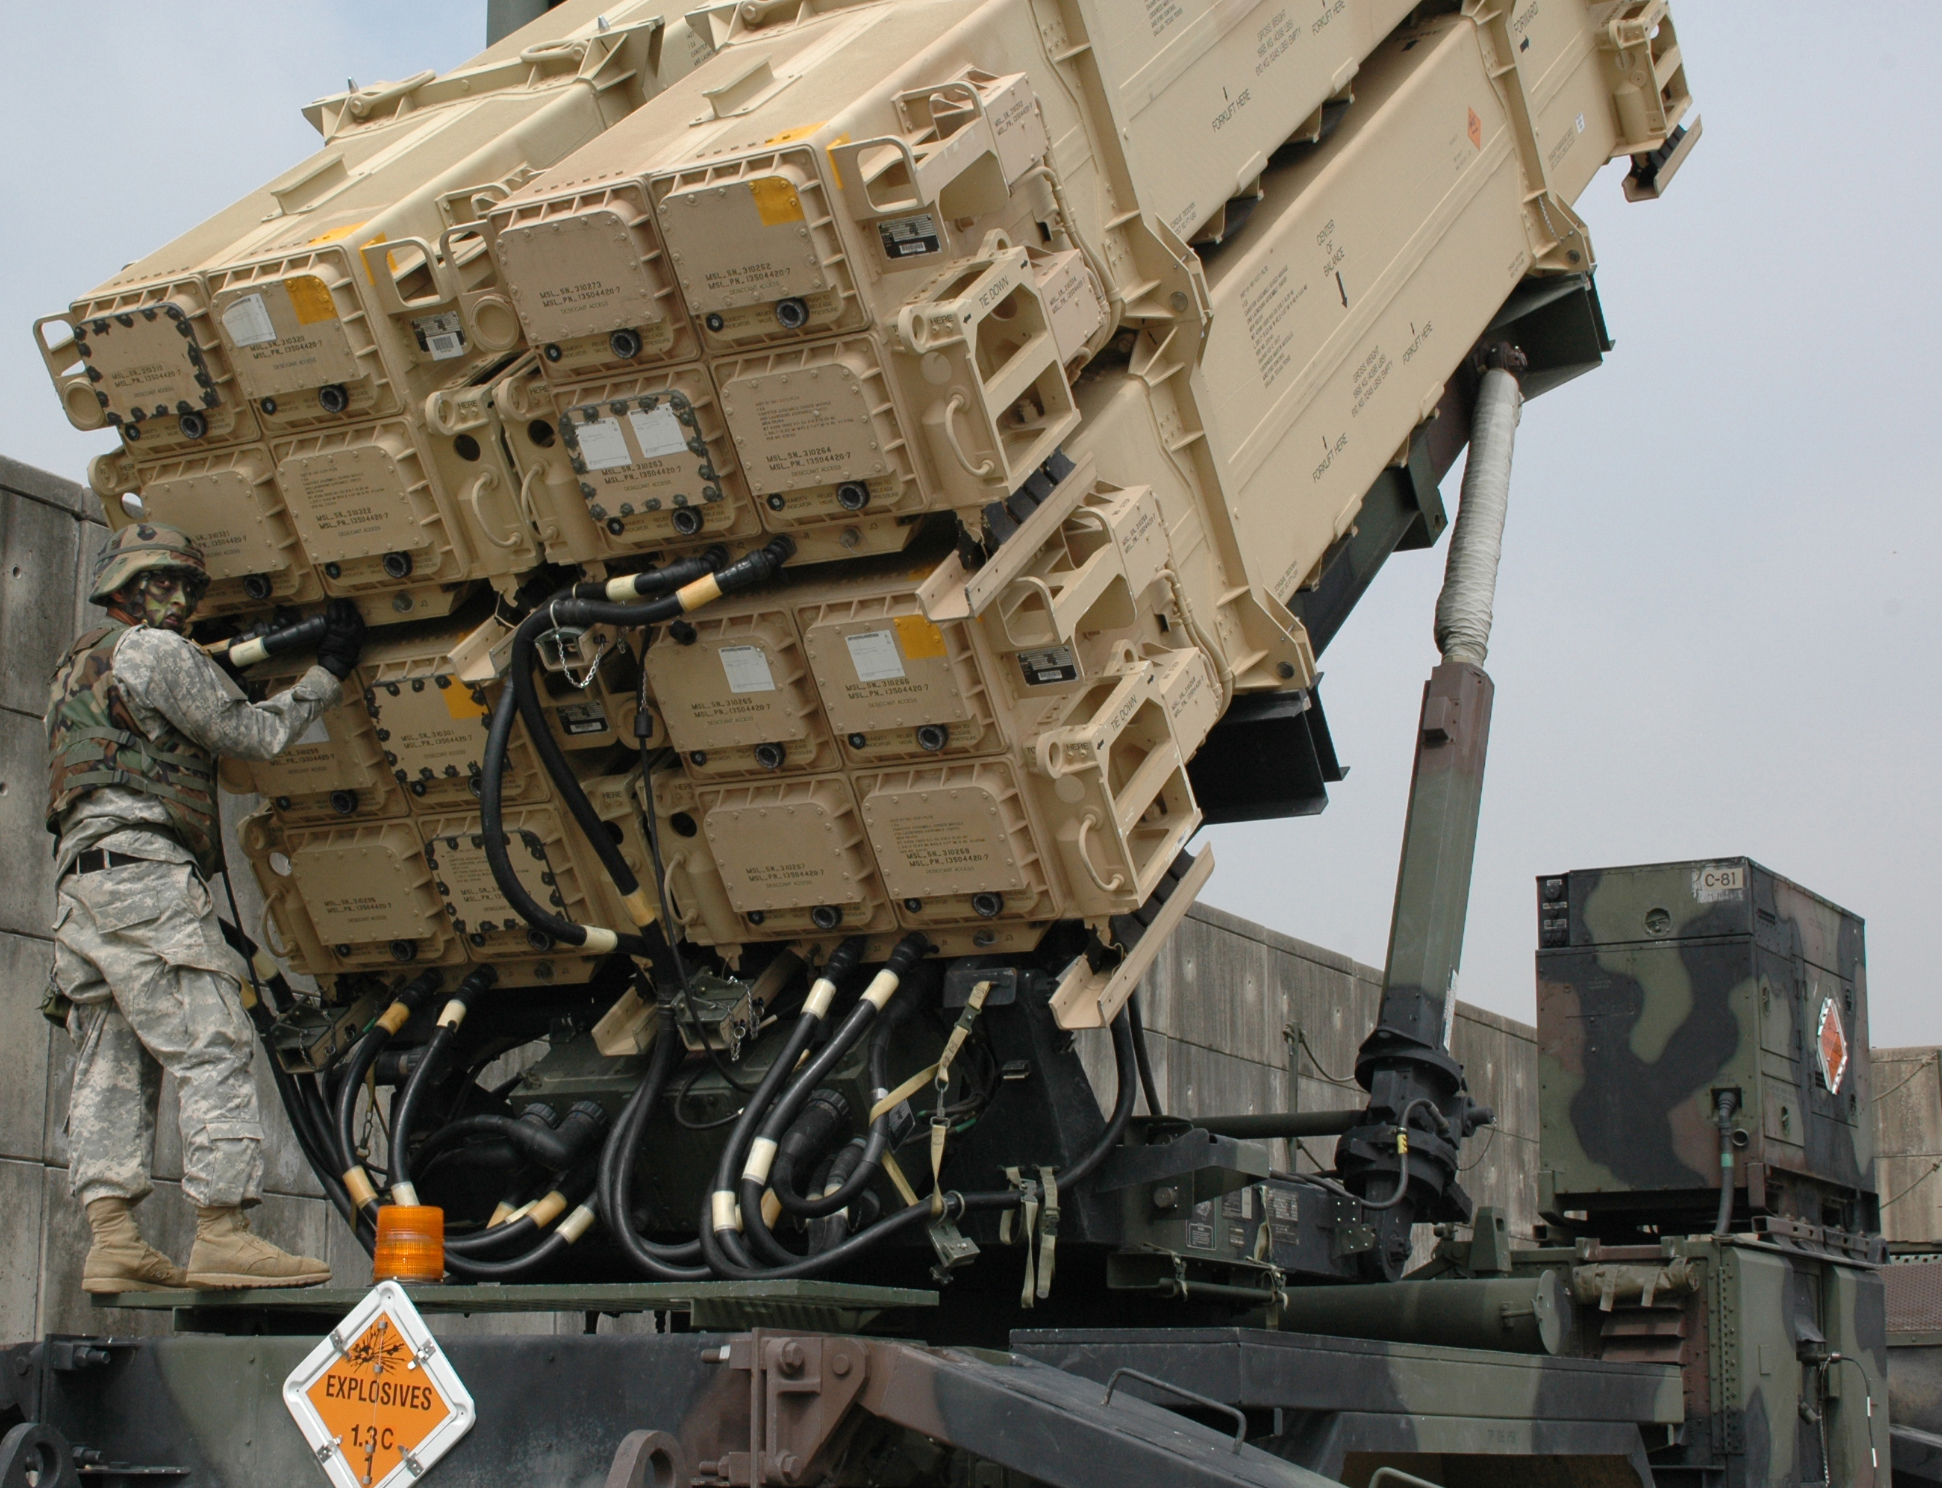 Maintenance_check_on_a_Patriot_missile.jpg